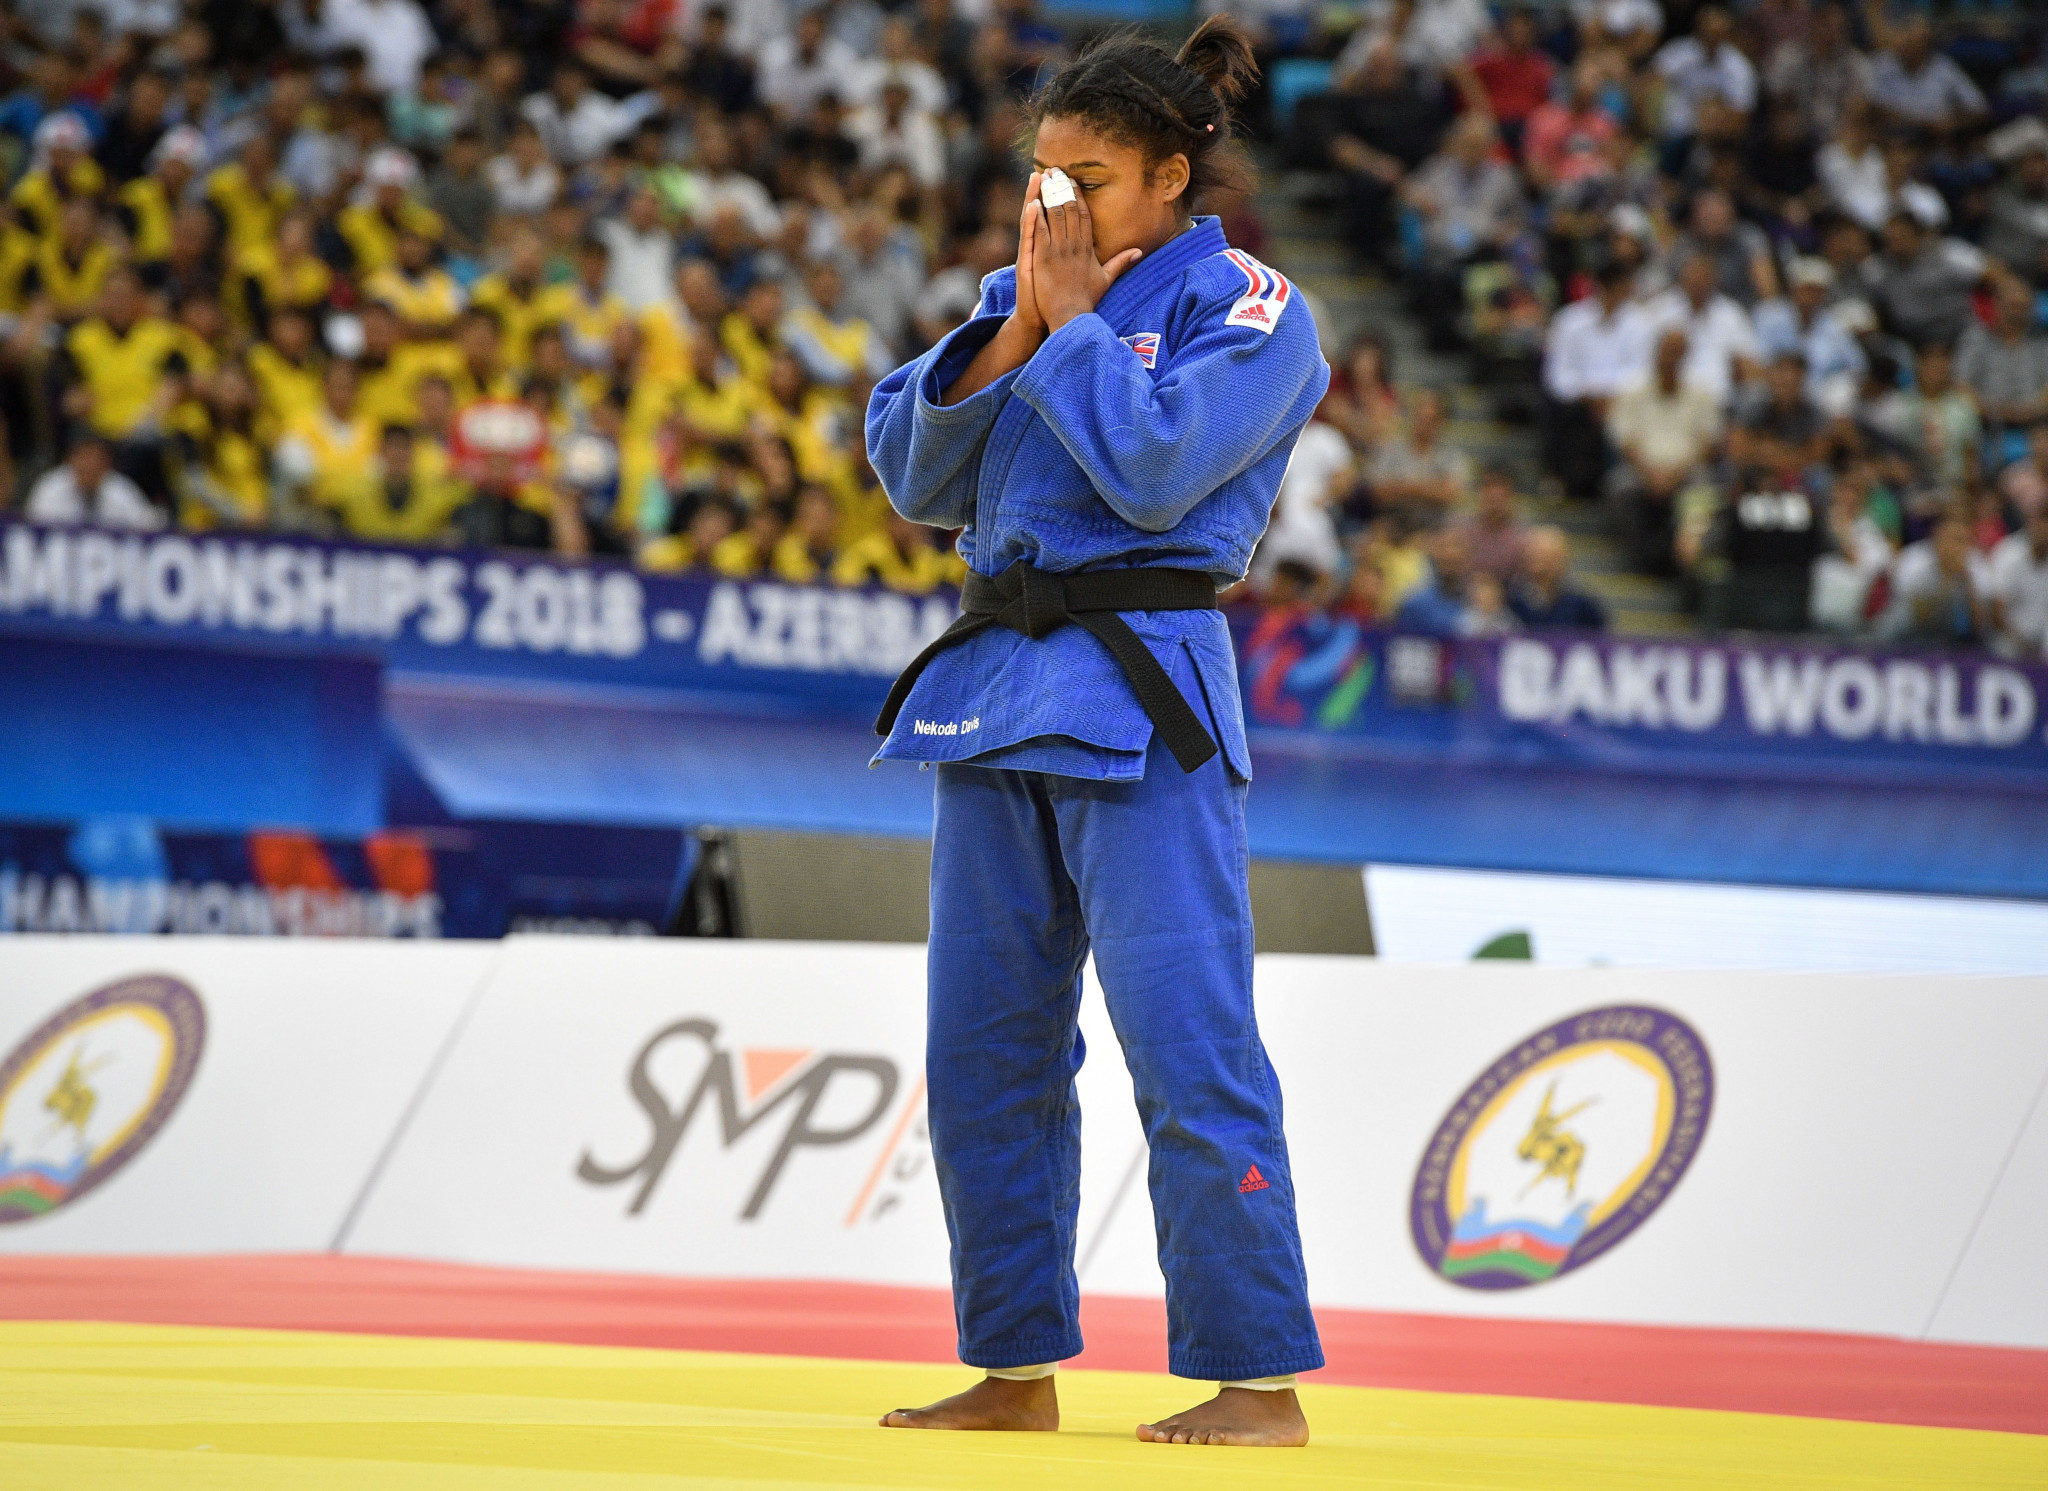 Judoka Davis to miss Tokyo 2020 Olympics as concussion recovery continues